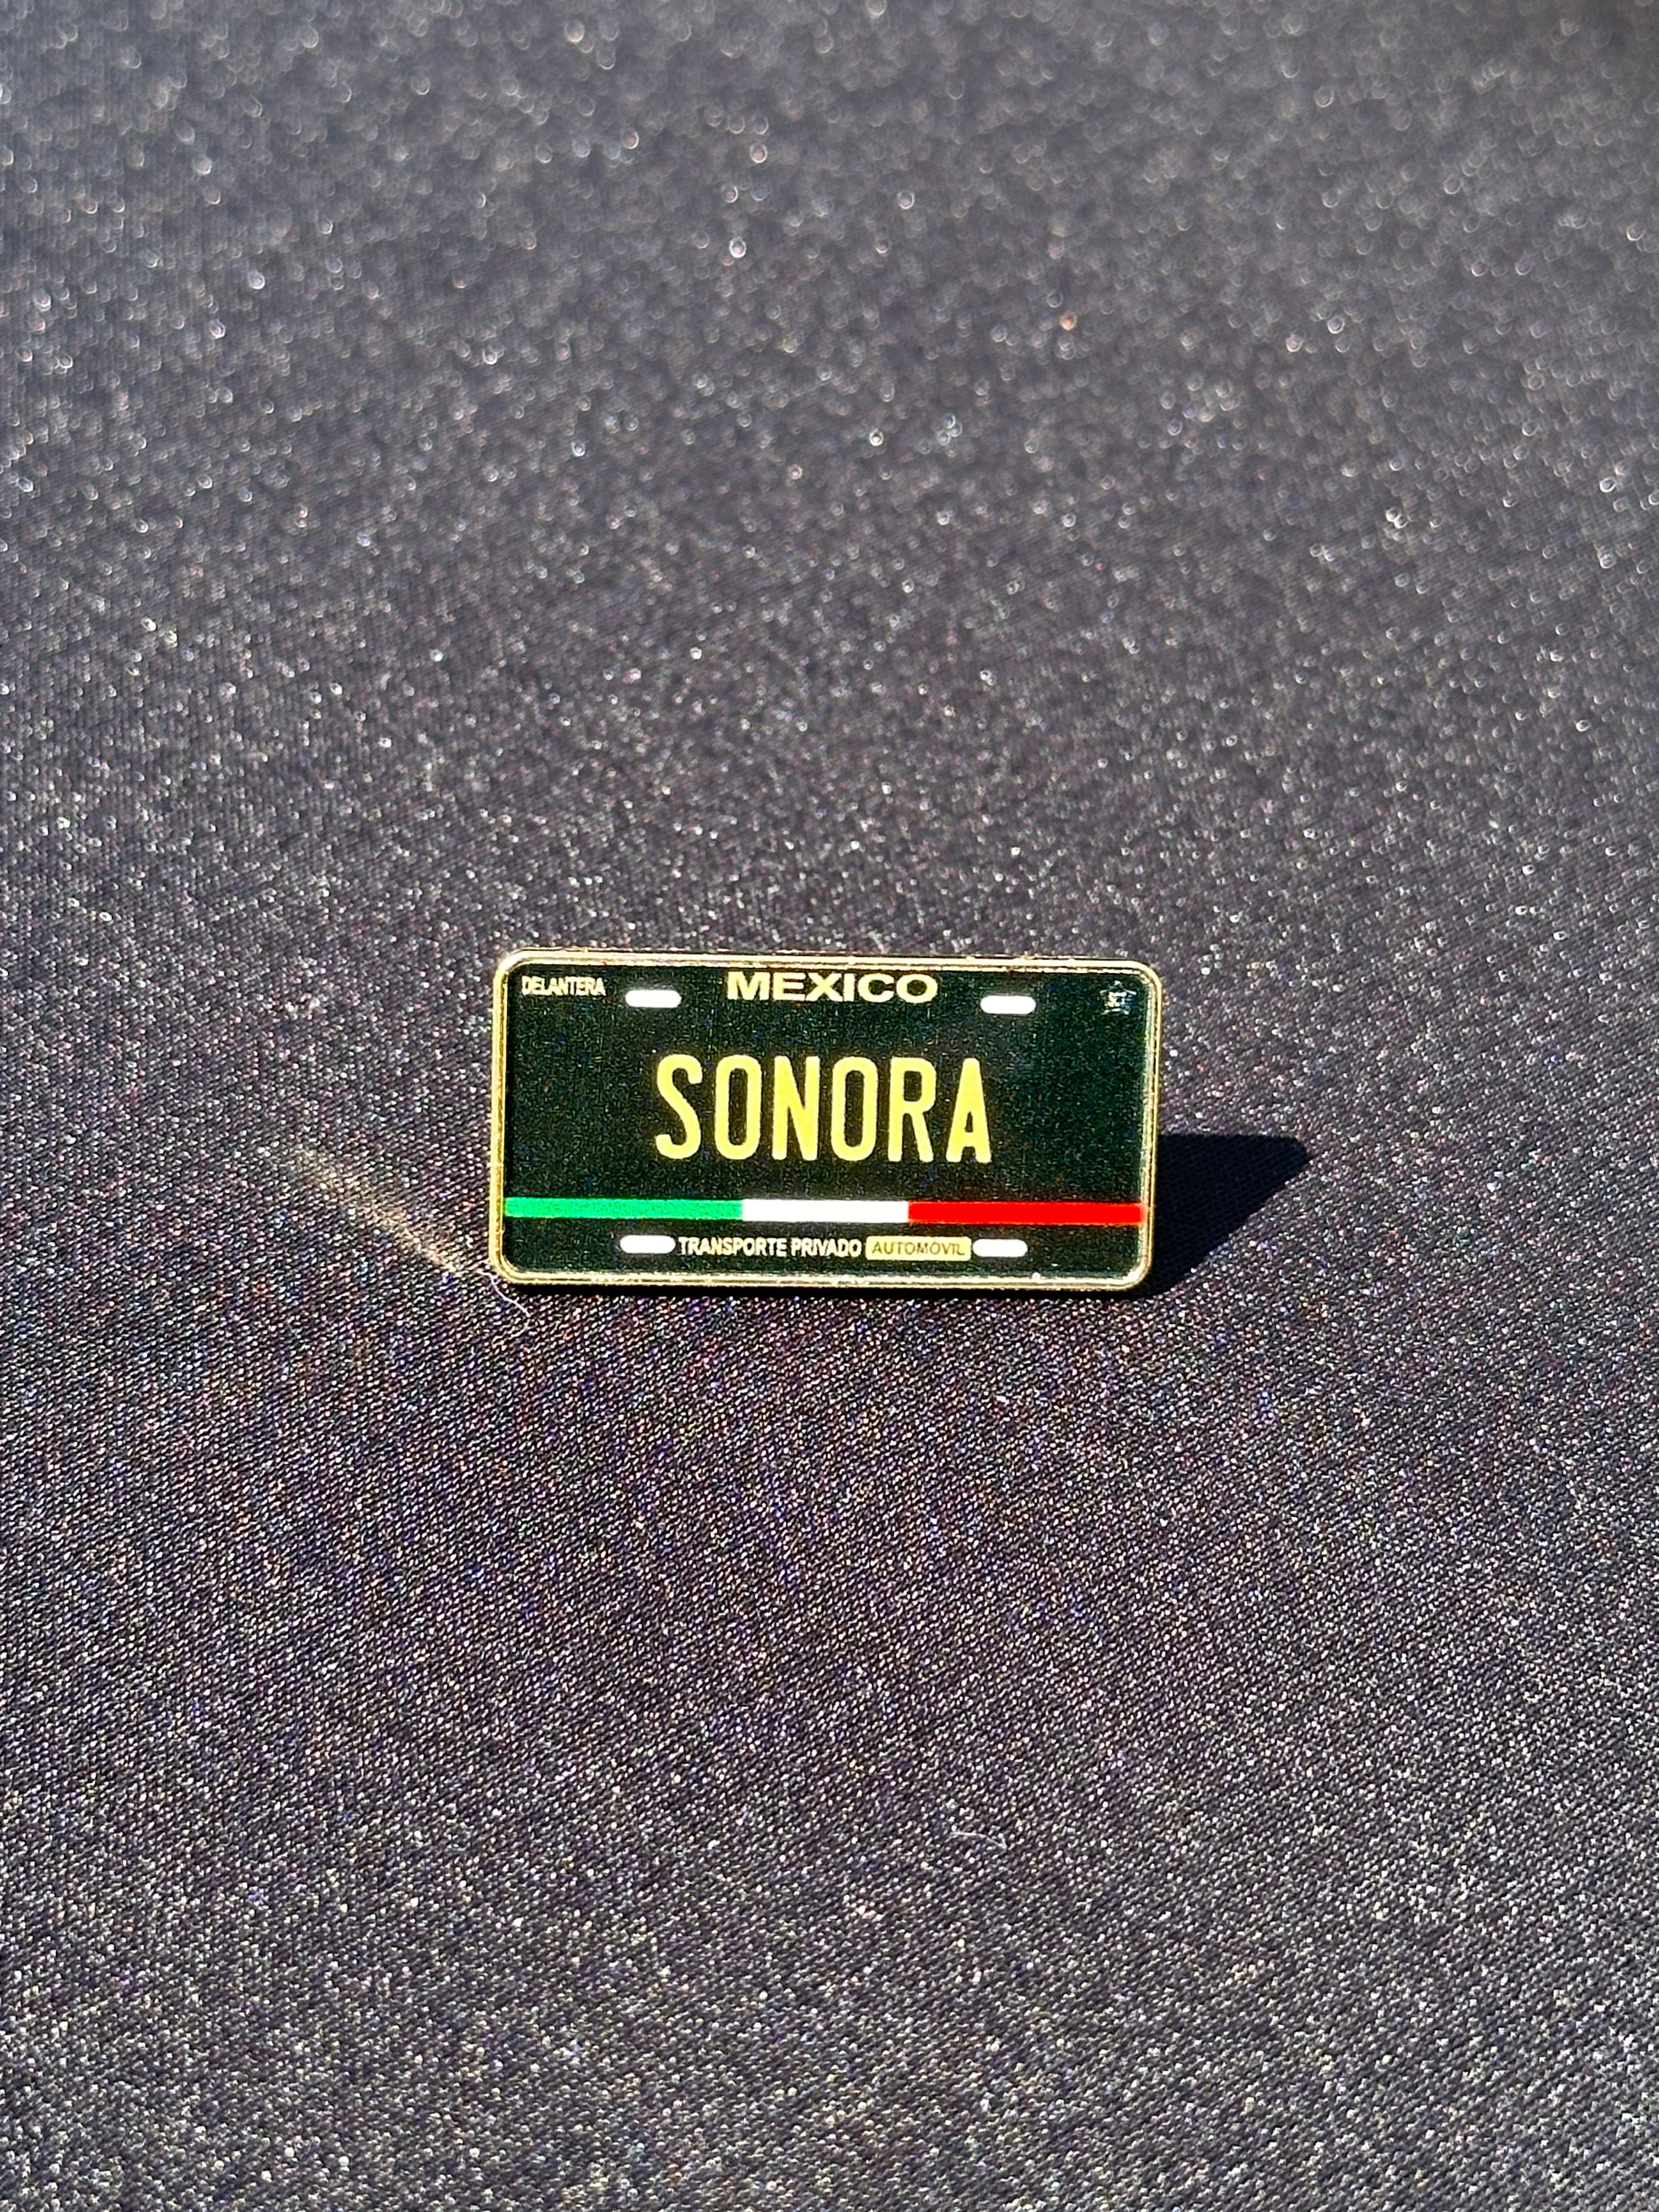 *NEW BLACK "SONORA" EXCLUSIVE LICENSE PLATE PIN VERY LIMITED